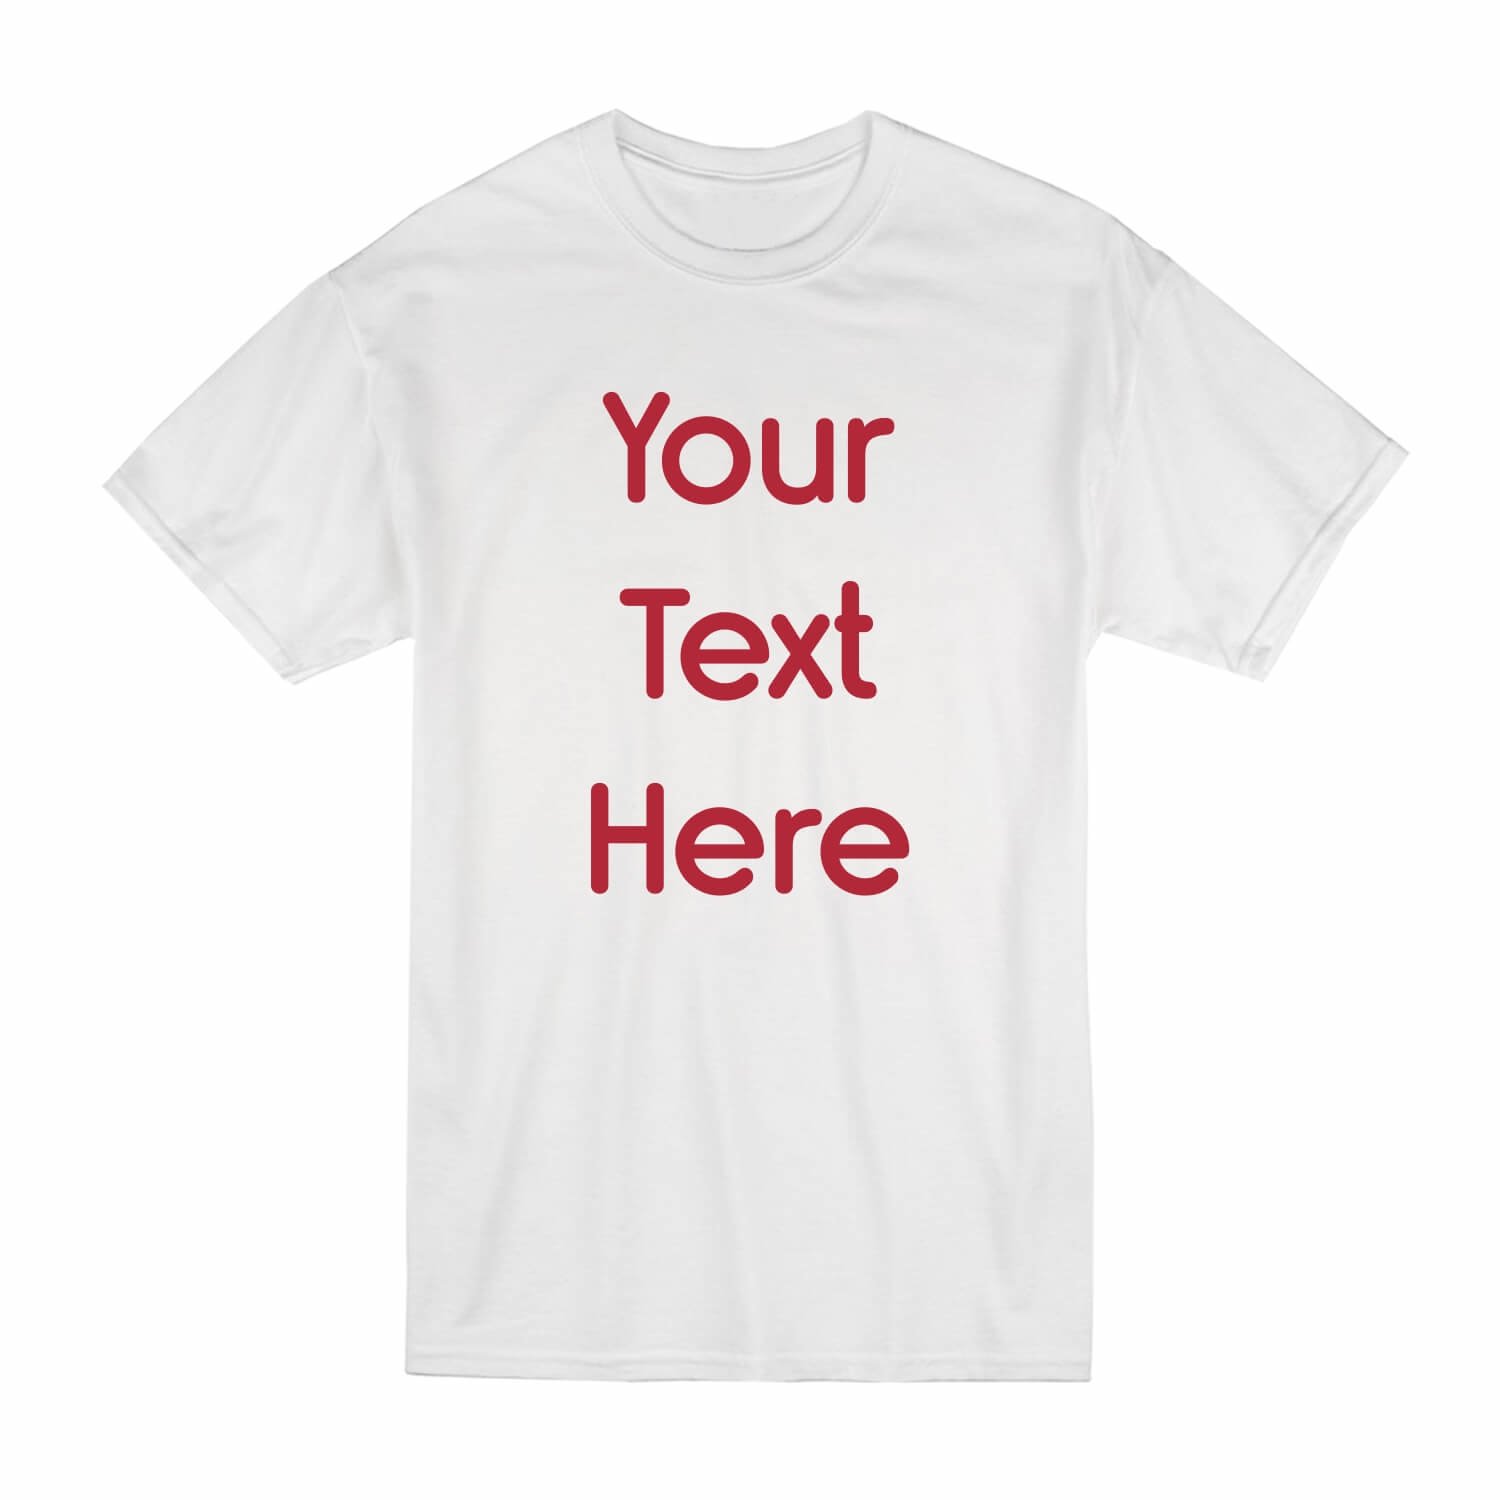 Custom Kids TShirt (Write Your Text) Free UK Delivery